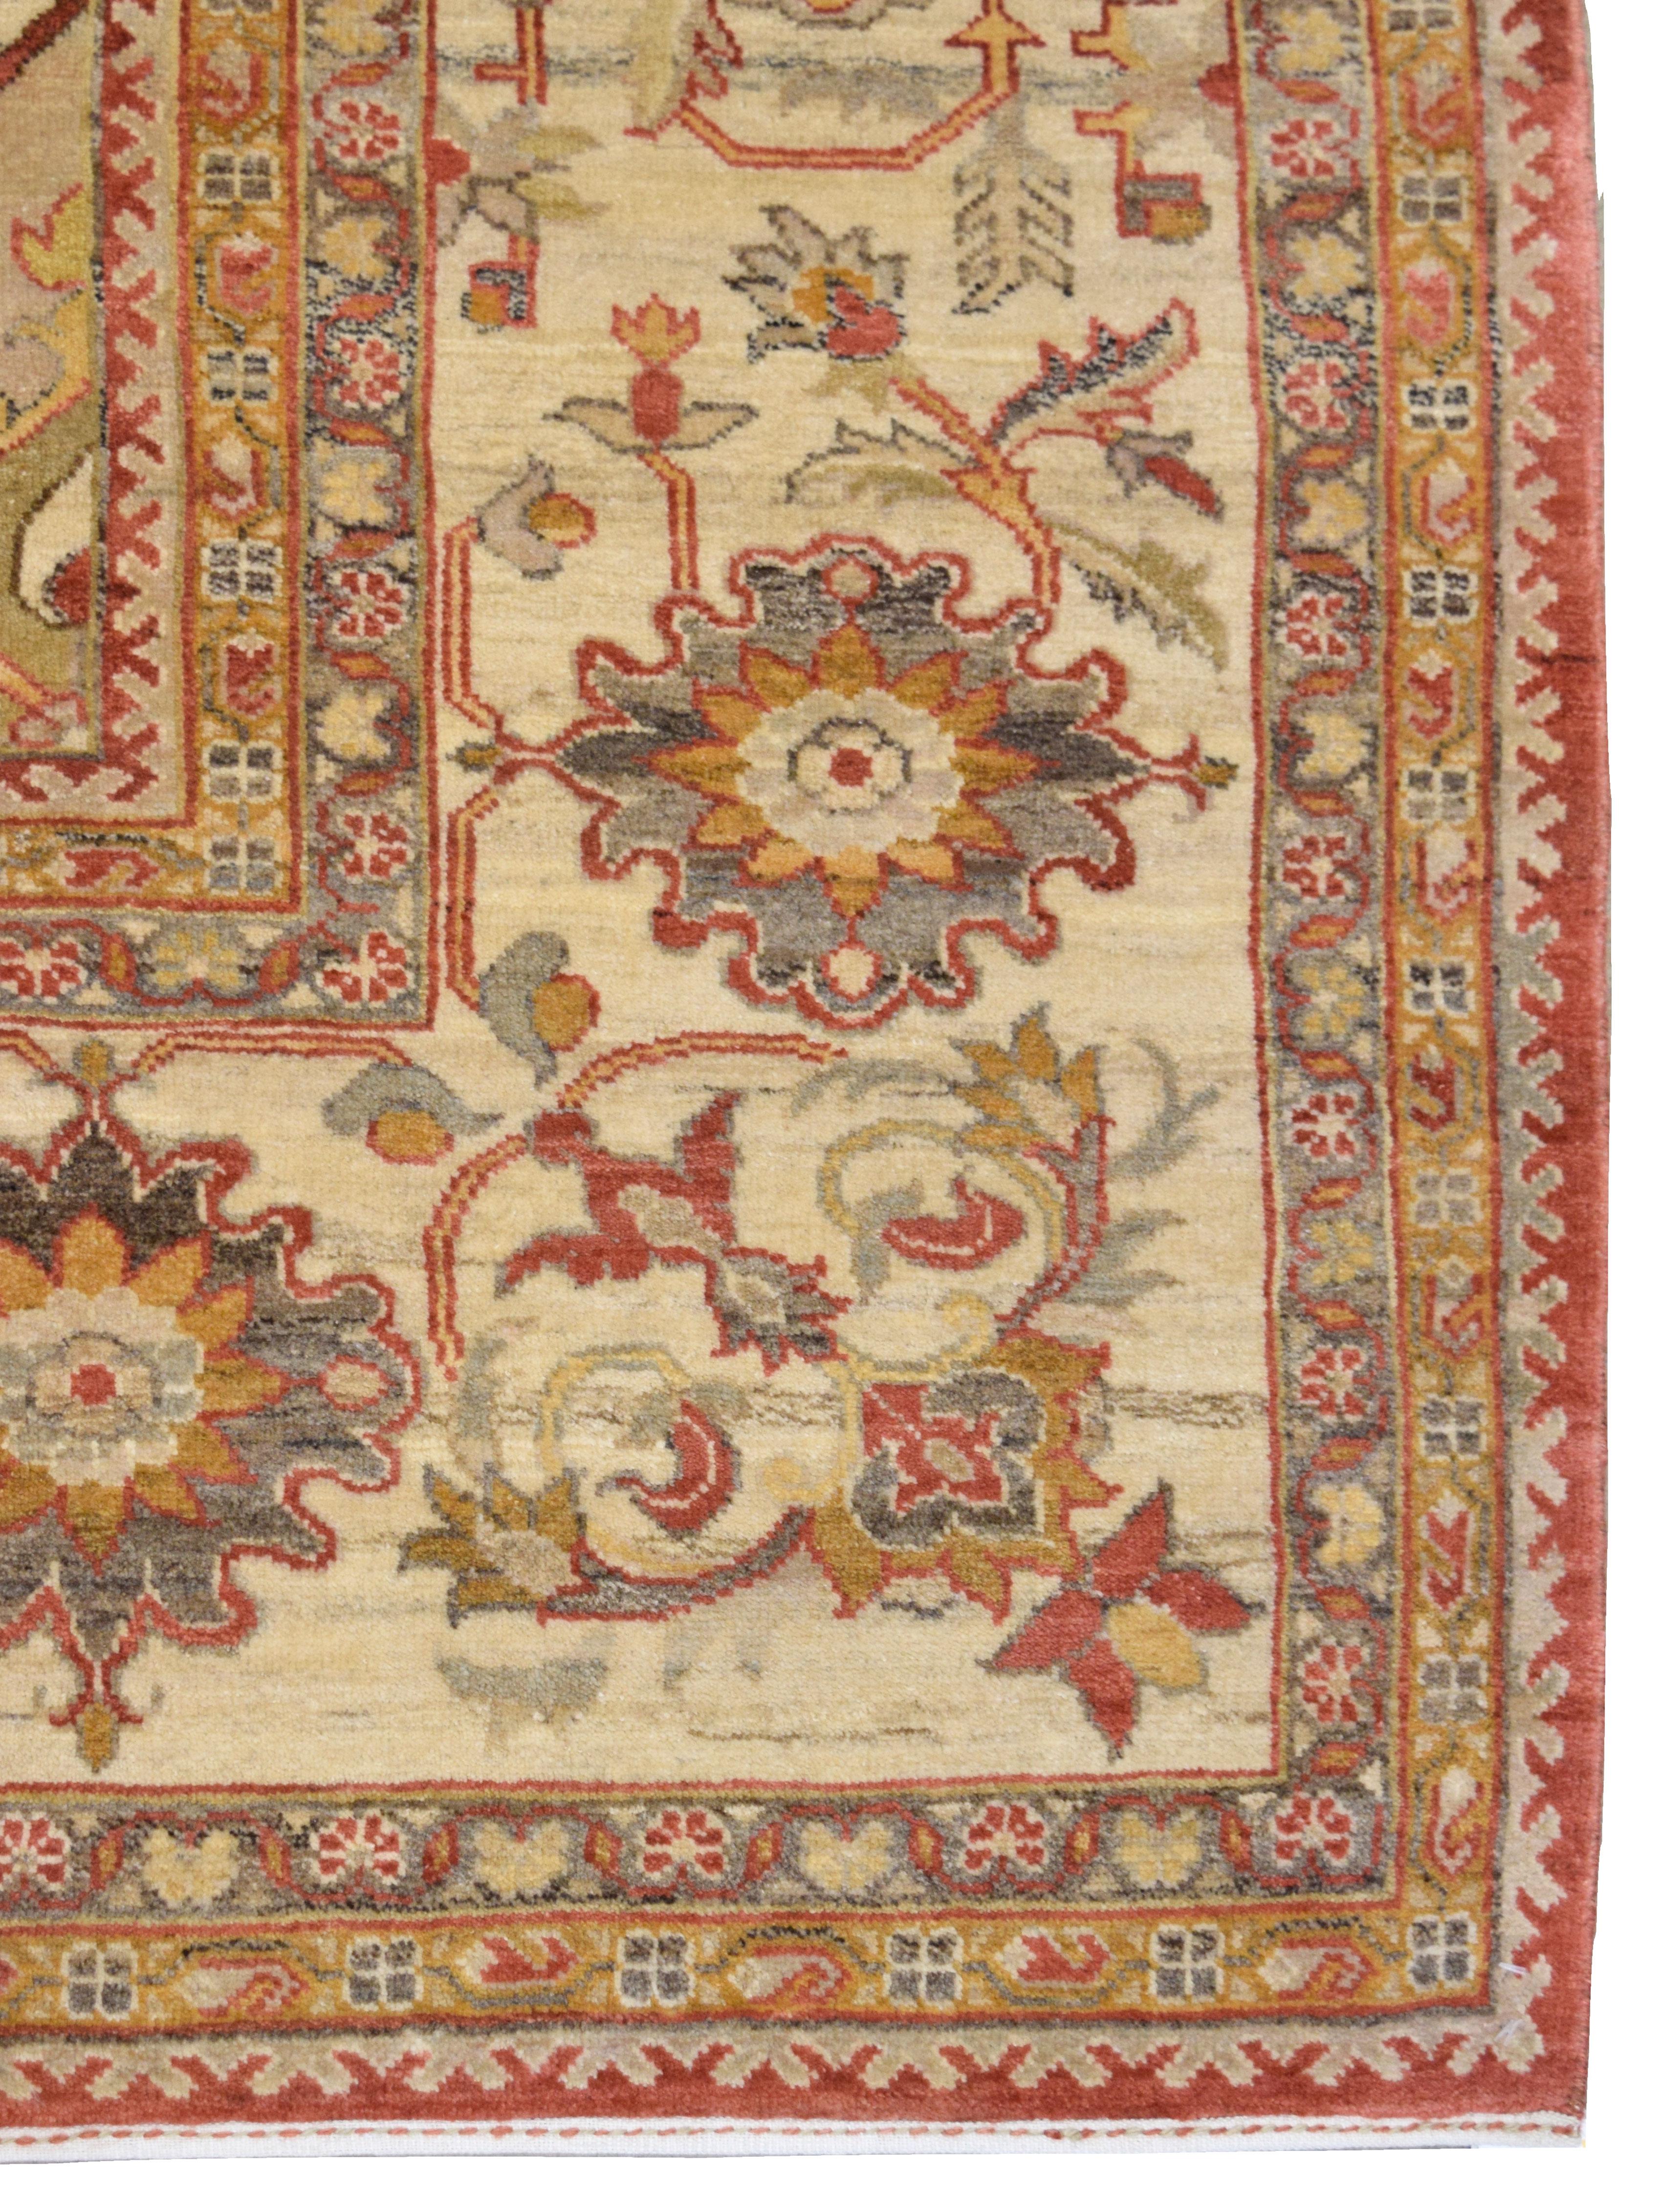 Tribal Persian Bakhtiari Carpet, Red, Taupe, and Gold, Wool, 10’ x 14’ For Sale 2